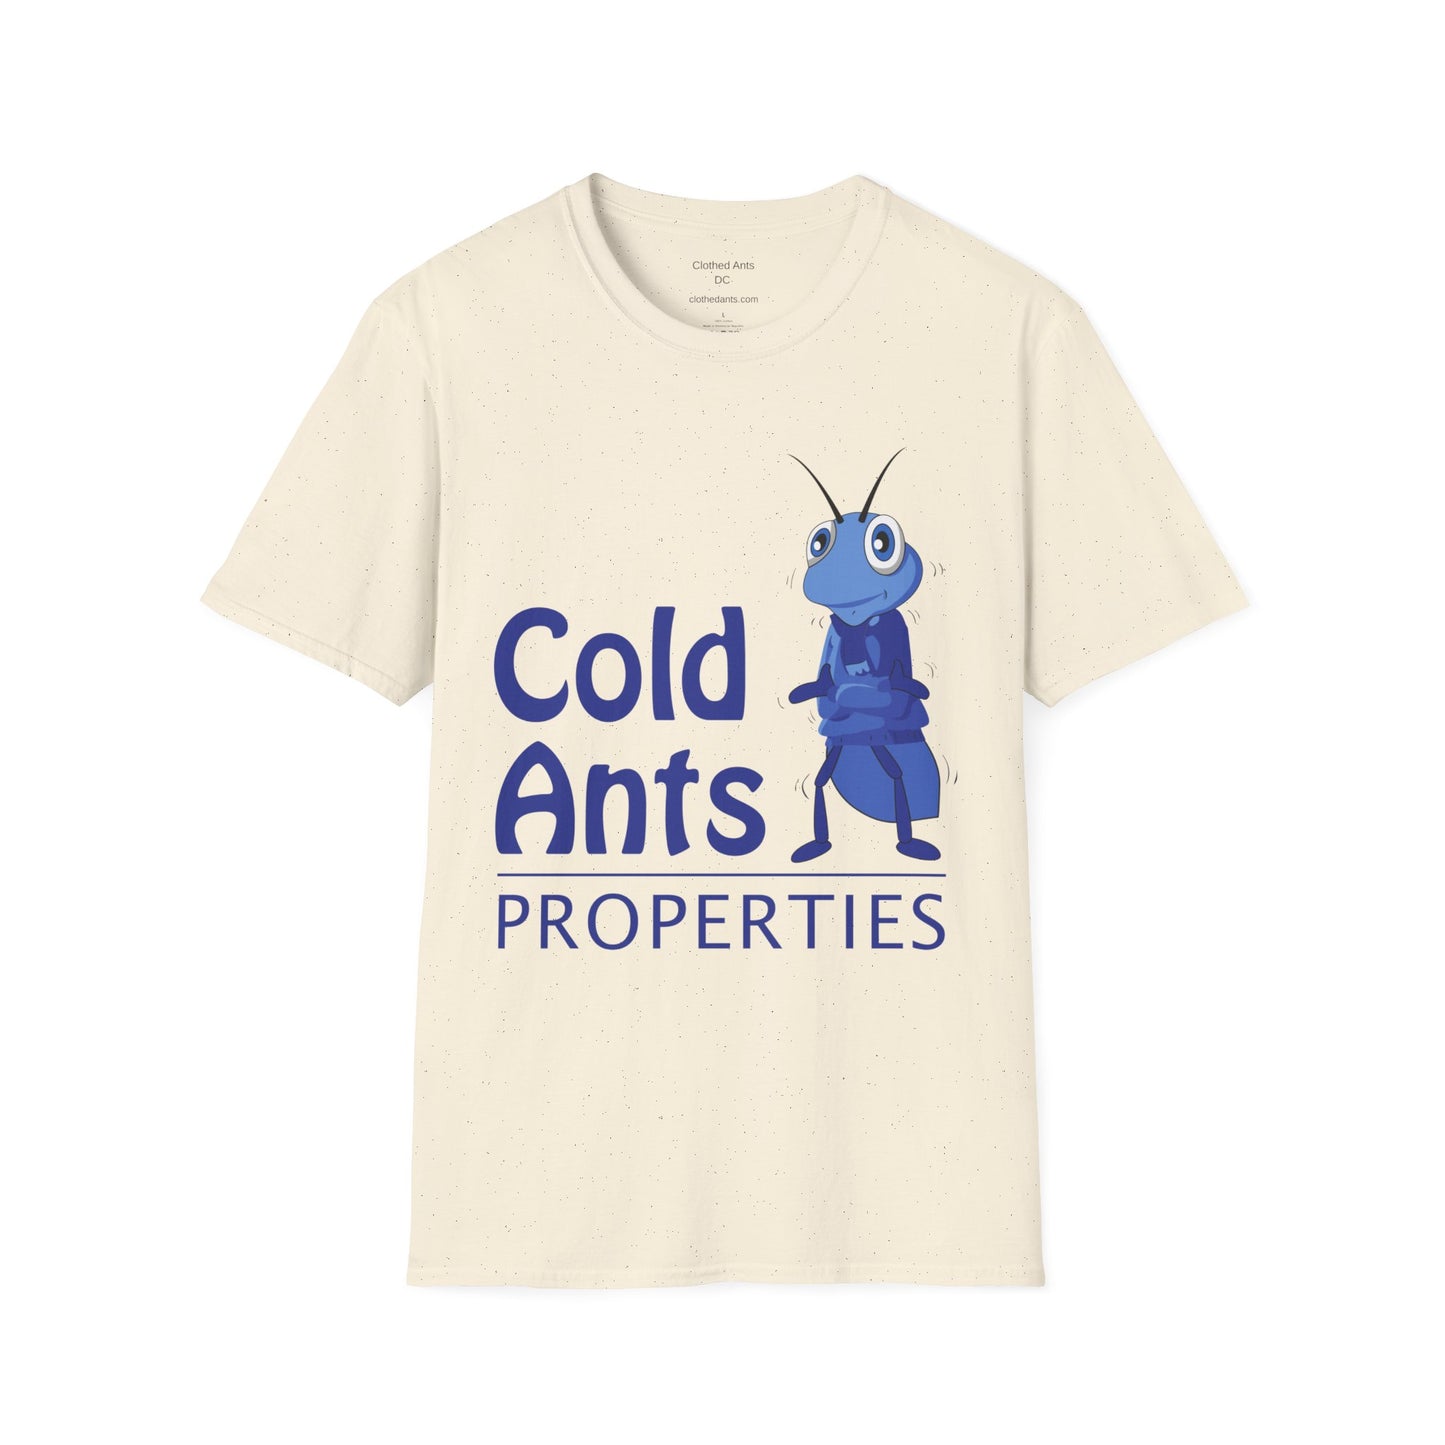 Cold Ants Properties